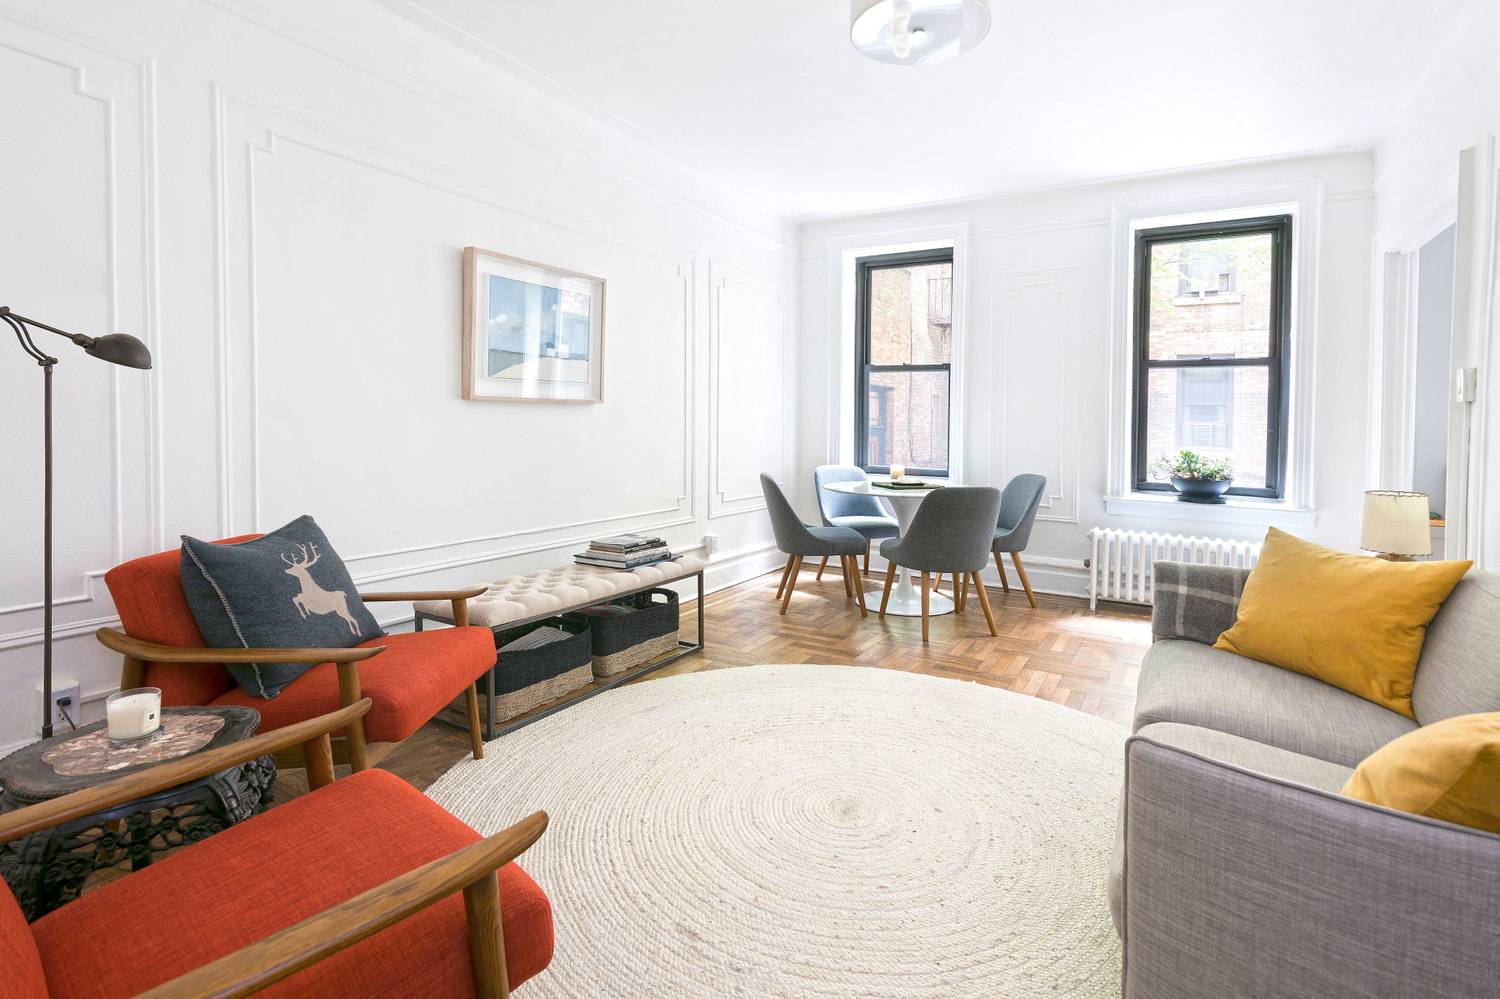 Blending classic pre war architecture with modern updates, this elevated first floor co op unit has been recently renovated to the owner's impeccable taste, providing clean lines while maintaining original ...